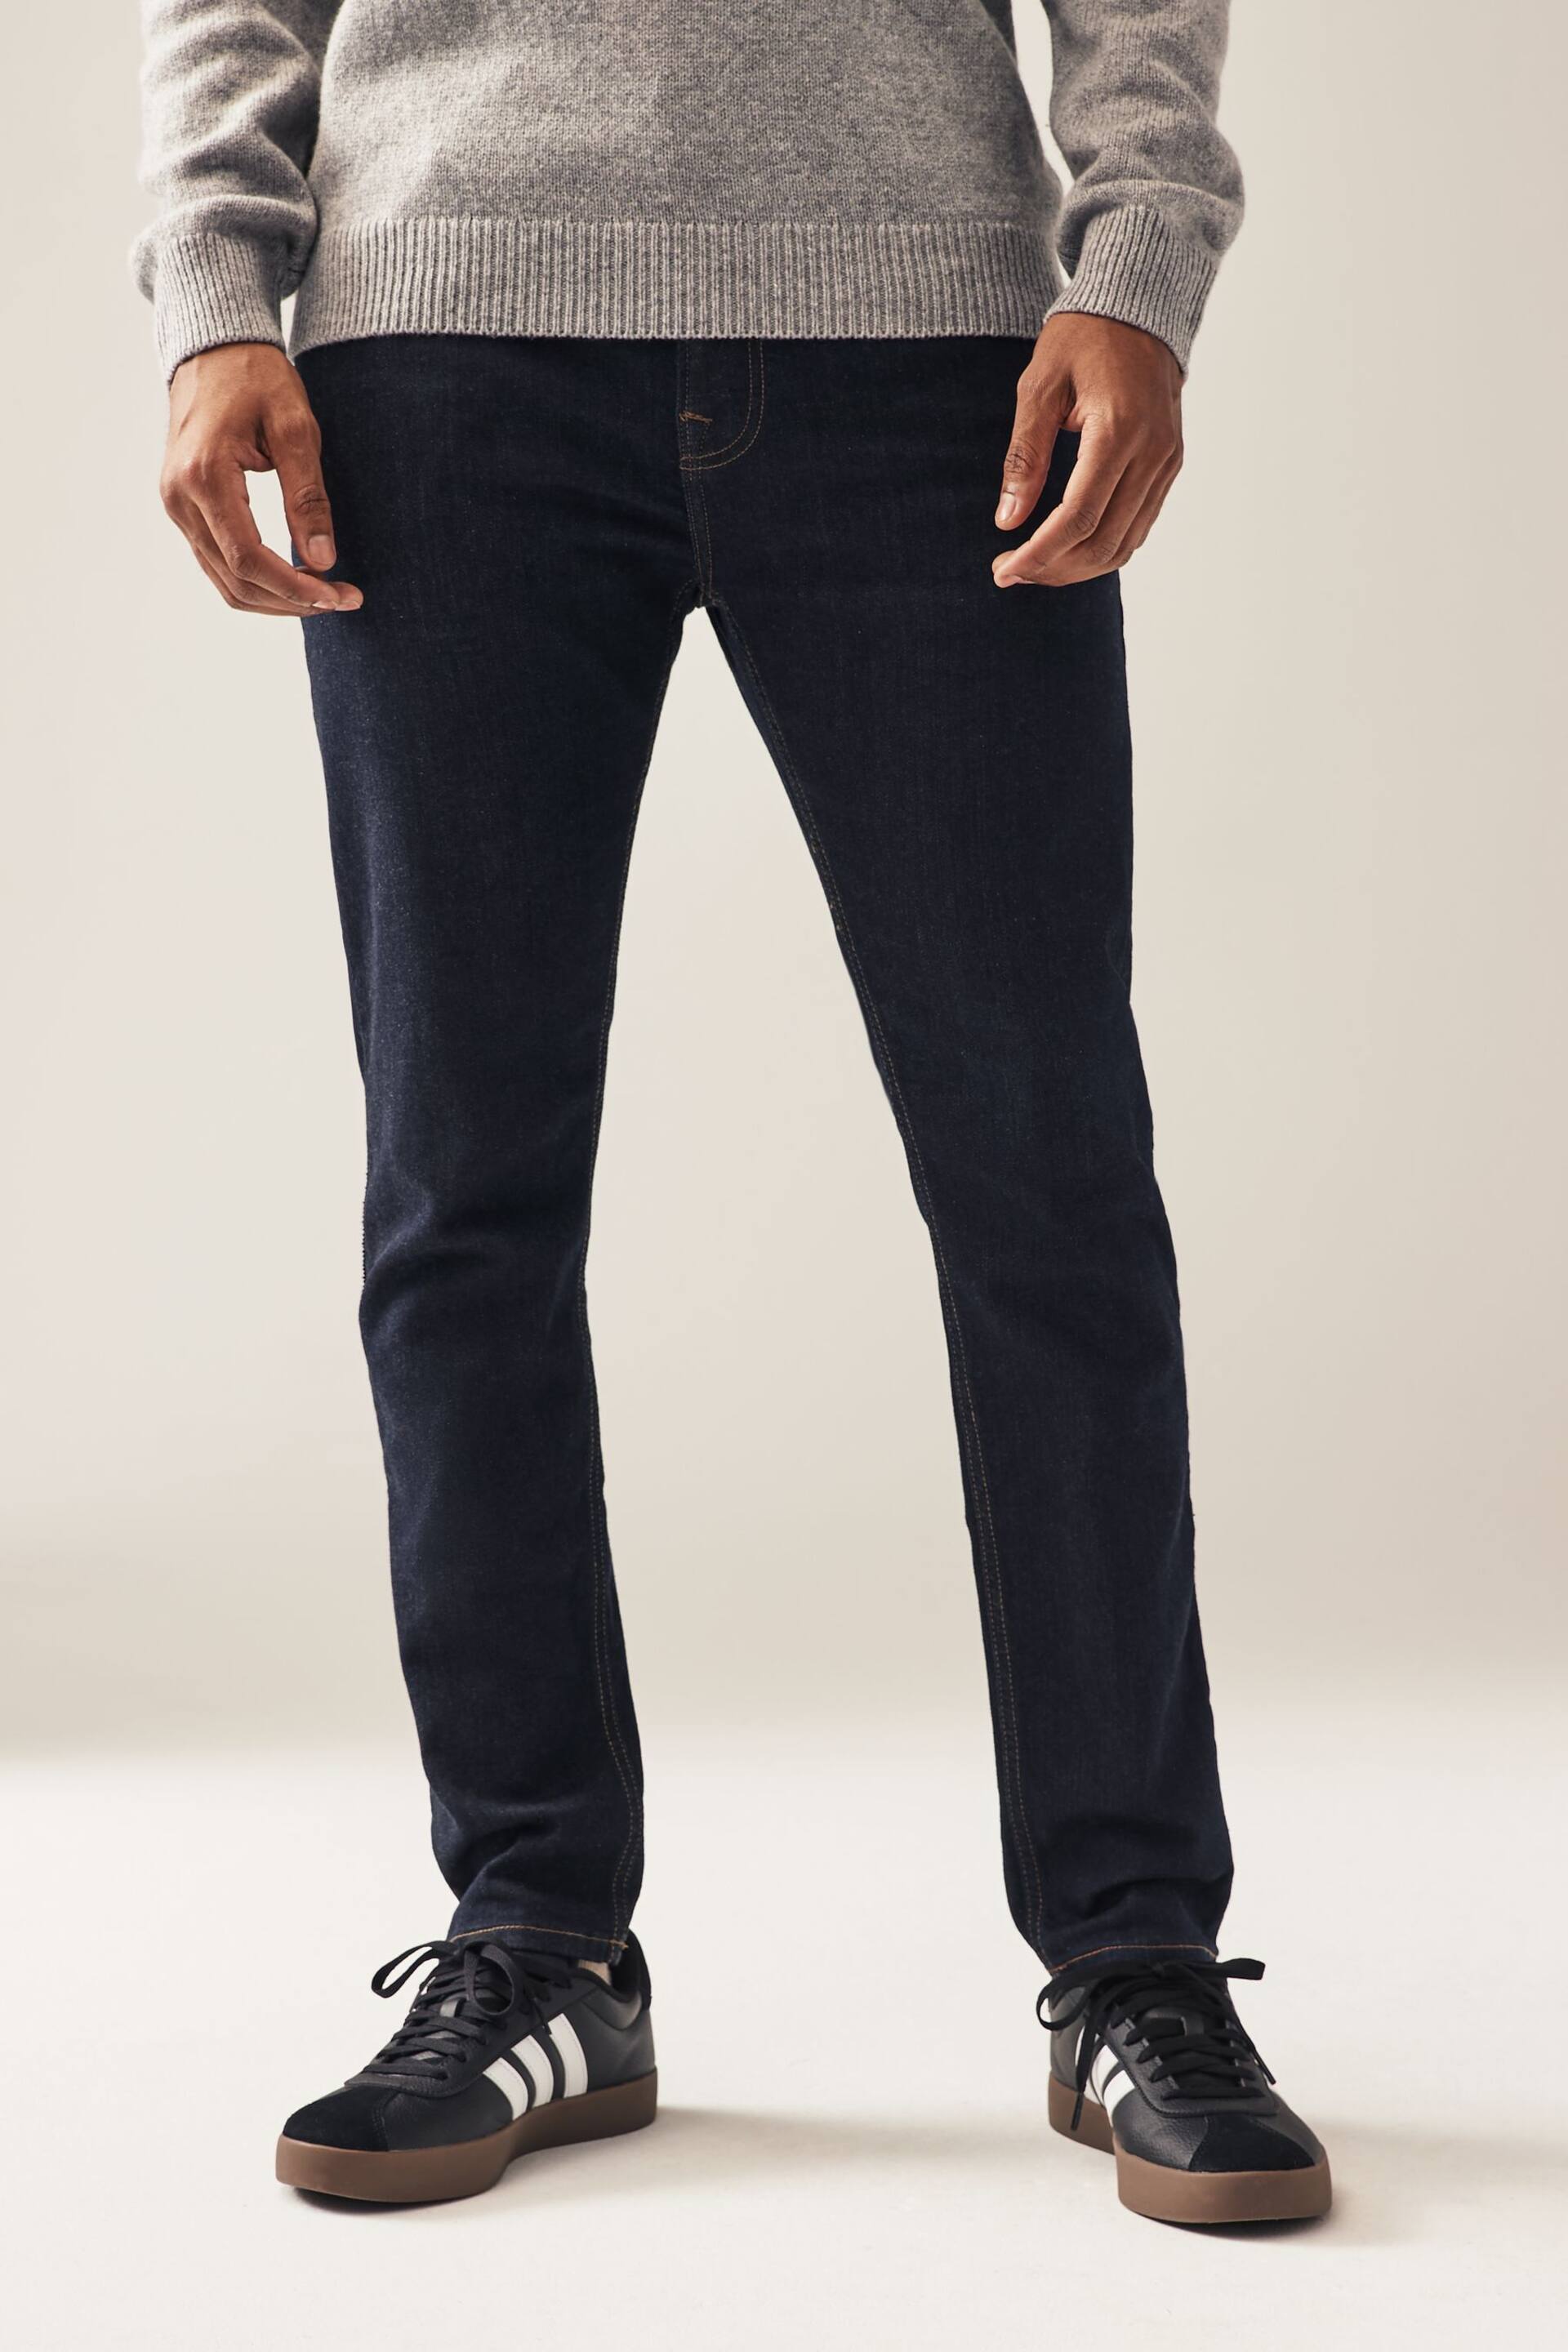 Blue Indigo Rinse Skinny Fit Classic Stretch Jeans - Image 1 of 9